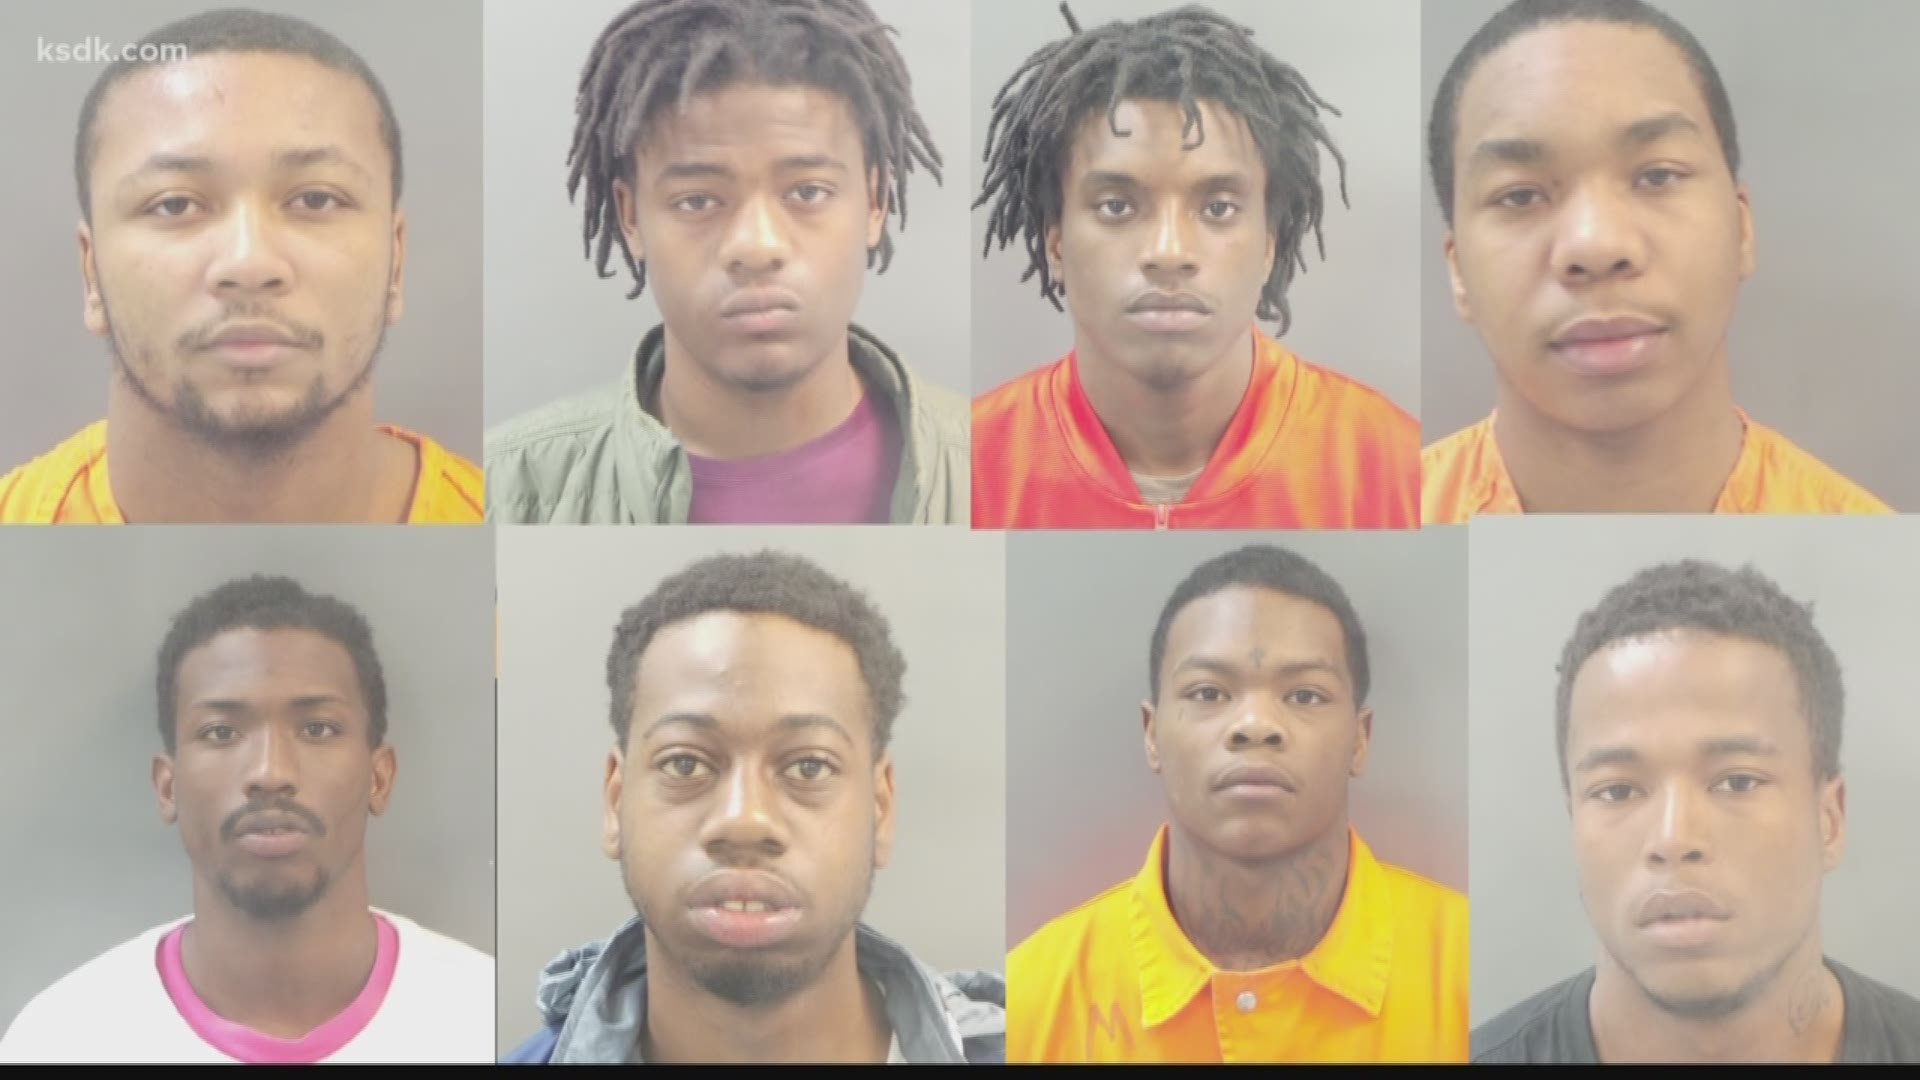 Gardner's office says 9 out of the 12 suspects are in custody for committing crimes all throughout the city.